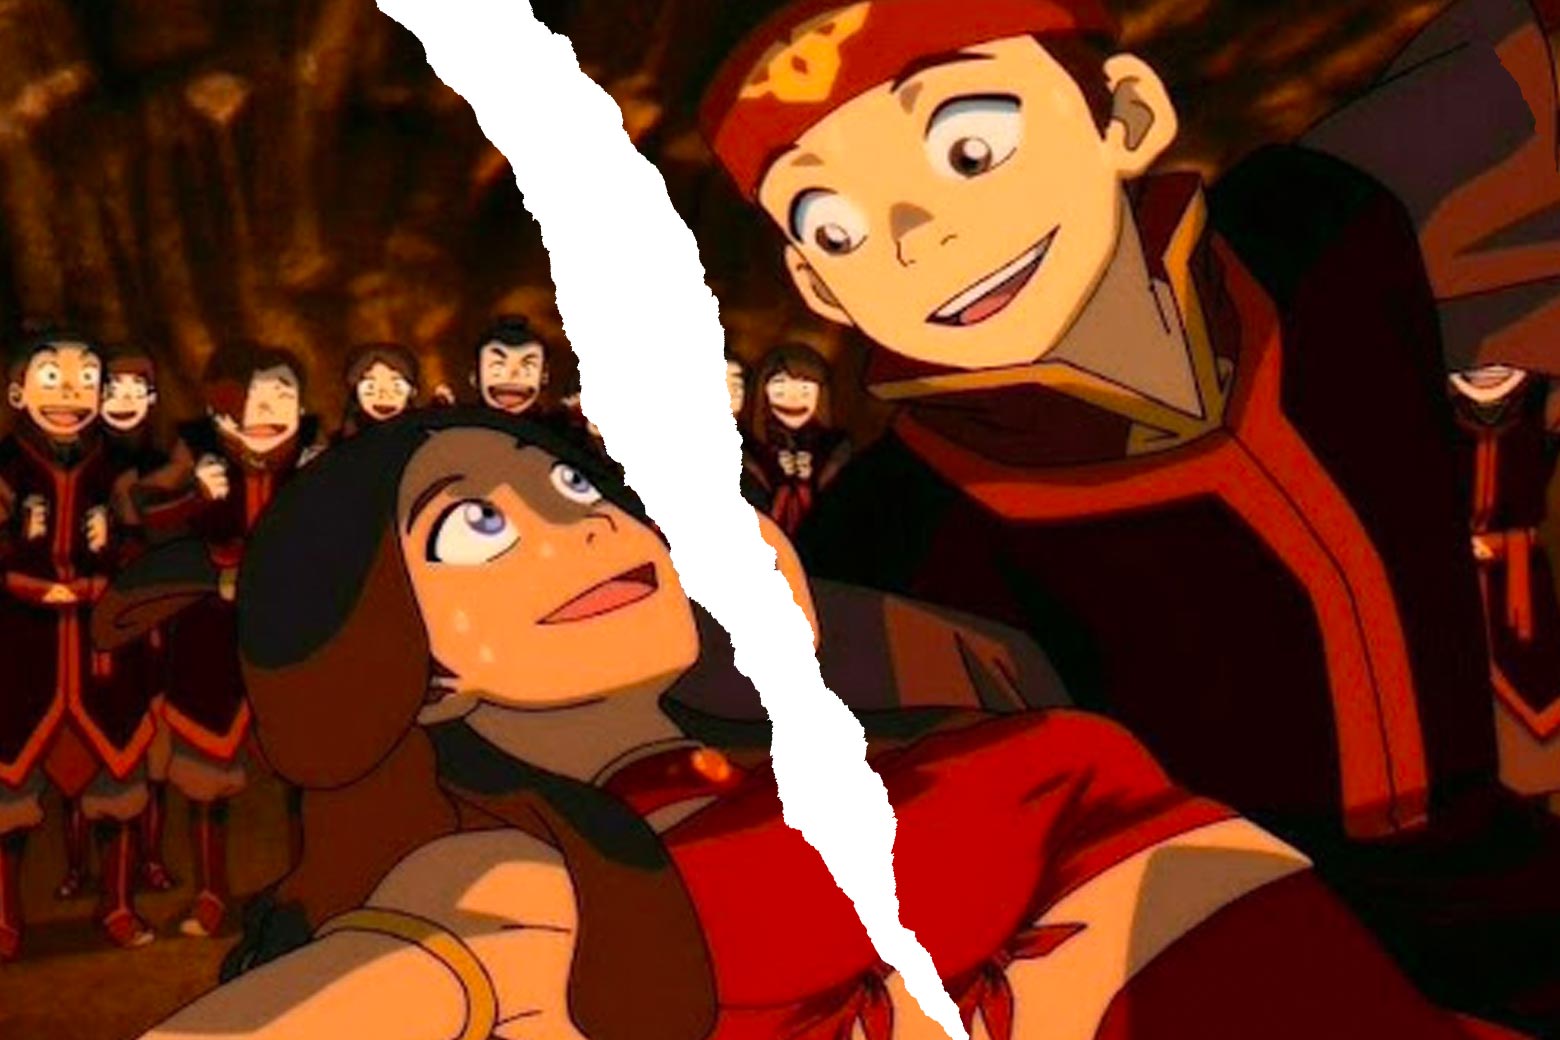 Avatar The Last Airbender’s Katara should’ve ended up with Zuko, not Aang.